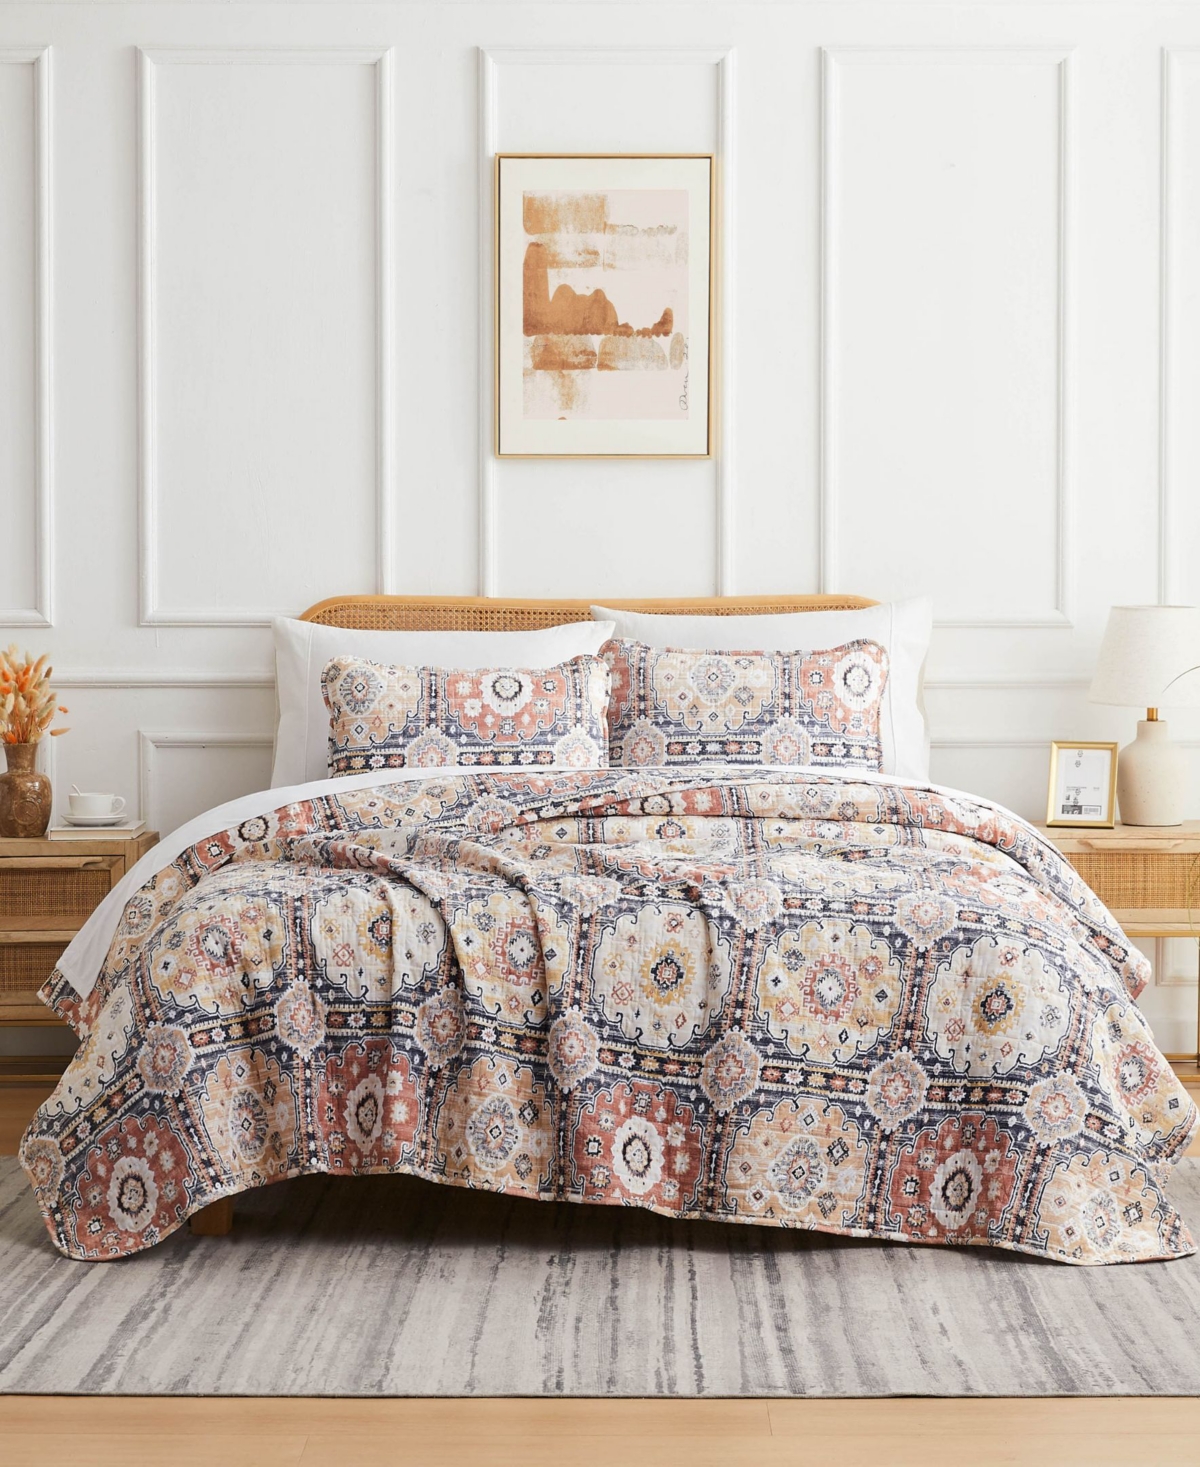 Southshore Fine Linens Kilim Oversized 2 Piece Quilt Set, Twin/set, Twin/twin Xl In Natural